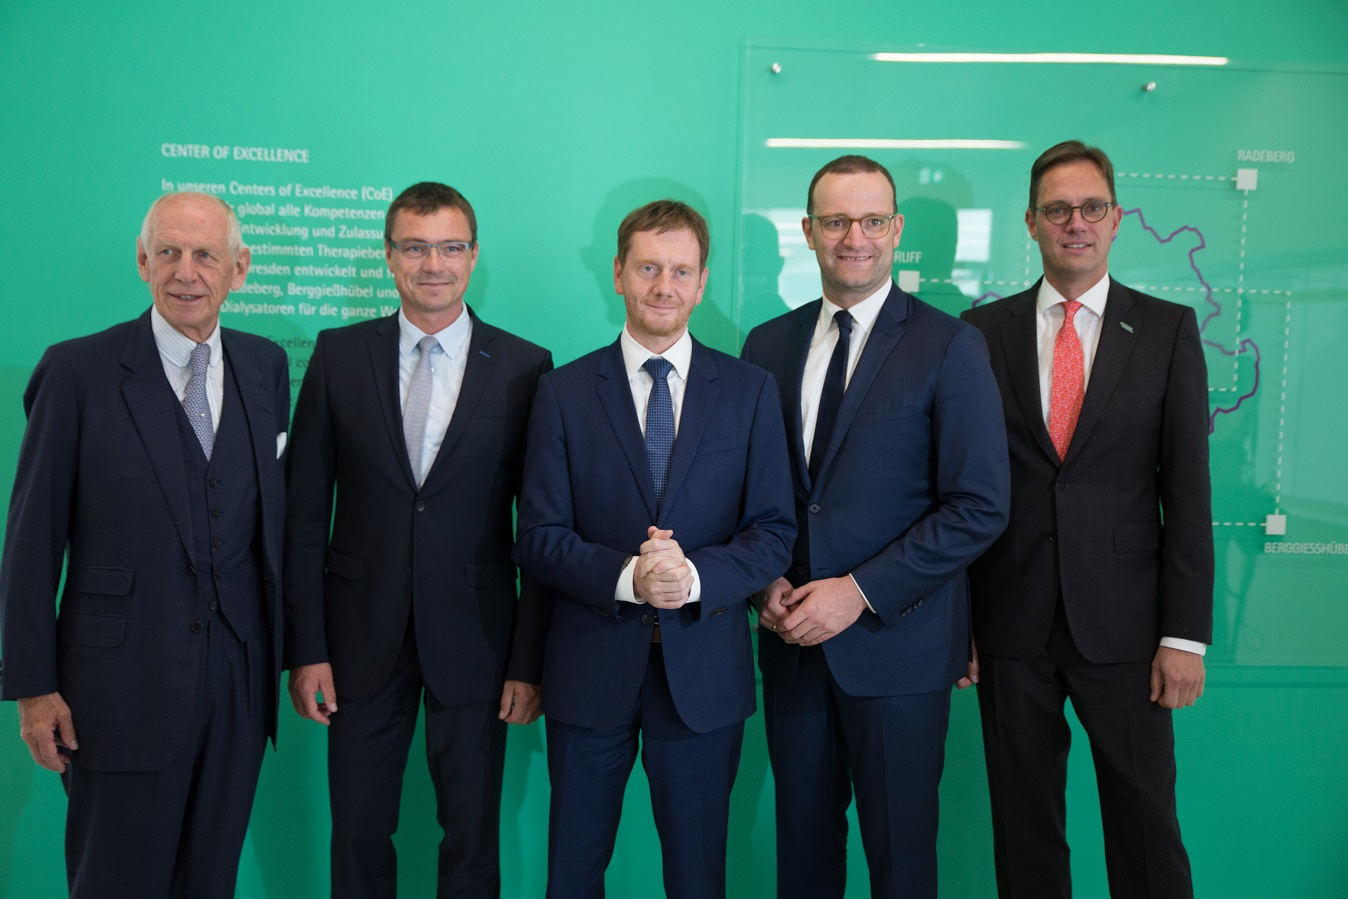 B. Braun inaugurates Europe’s most modern production site in Saxony